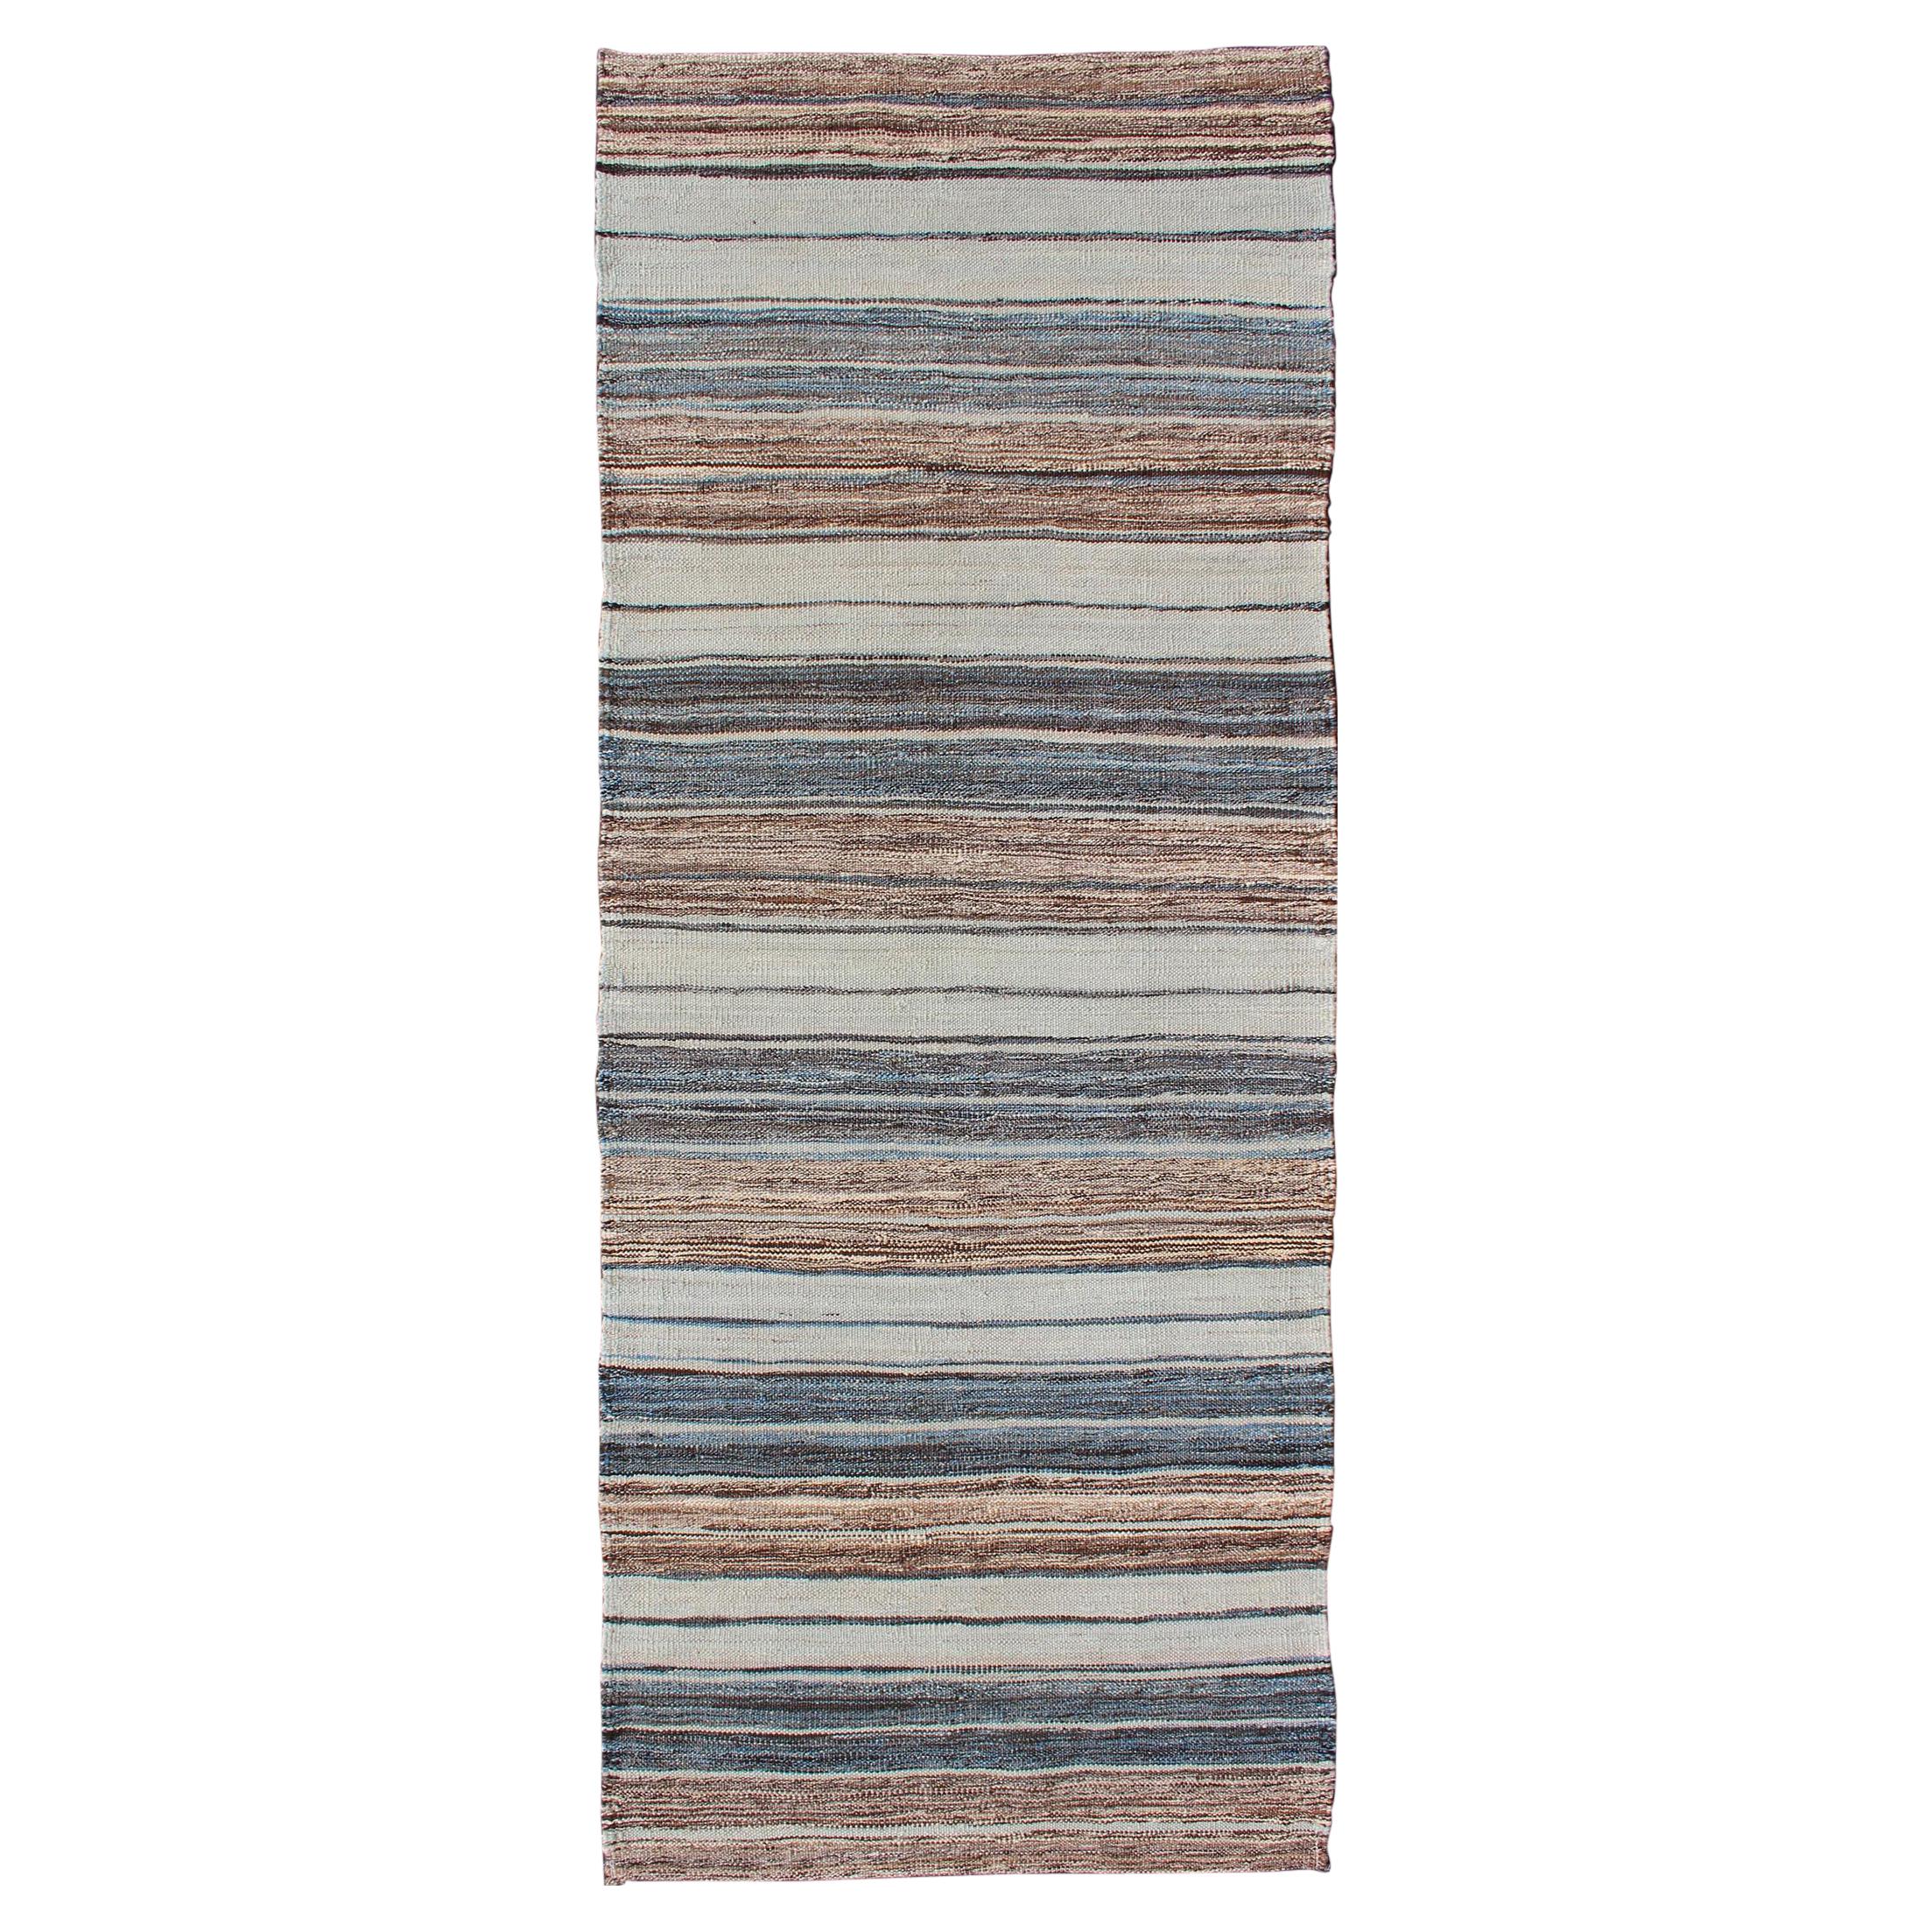 Modern Kilim Rug with Stripes in Shades of Blue, Taupe, Brown, and Cream Runner